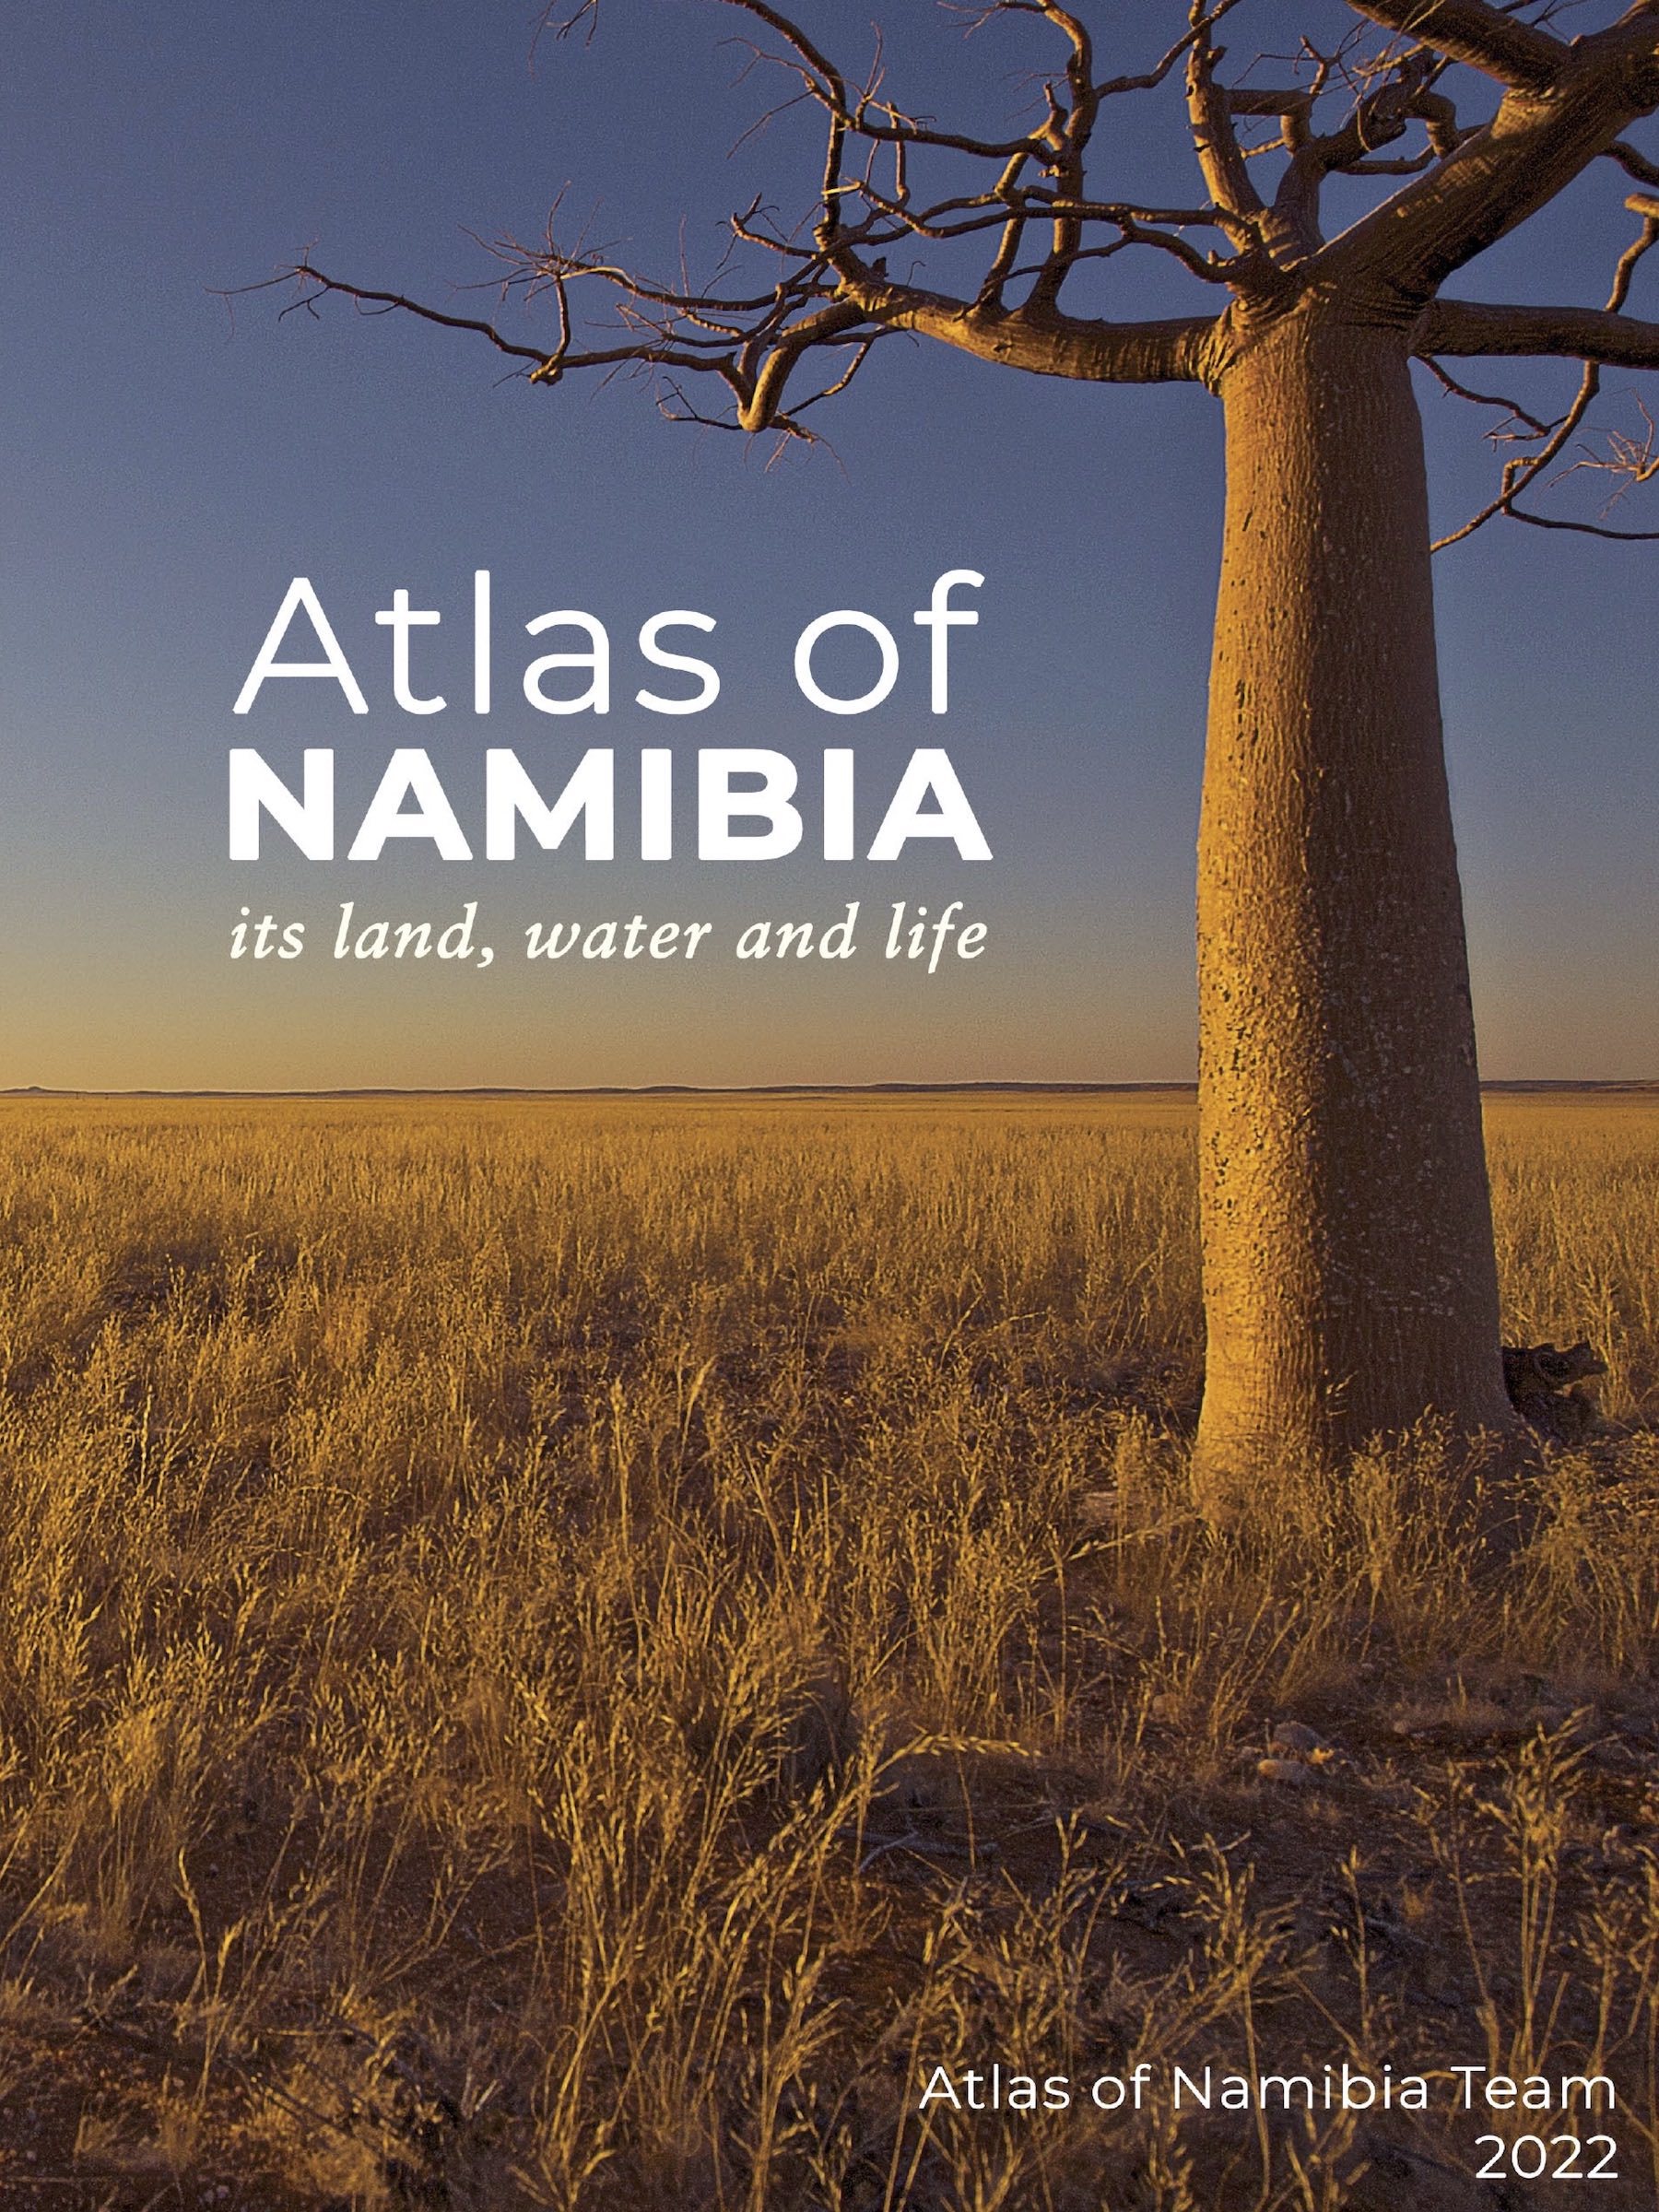 The full front cover of the Atlas of Namibia.